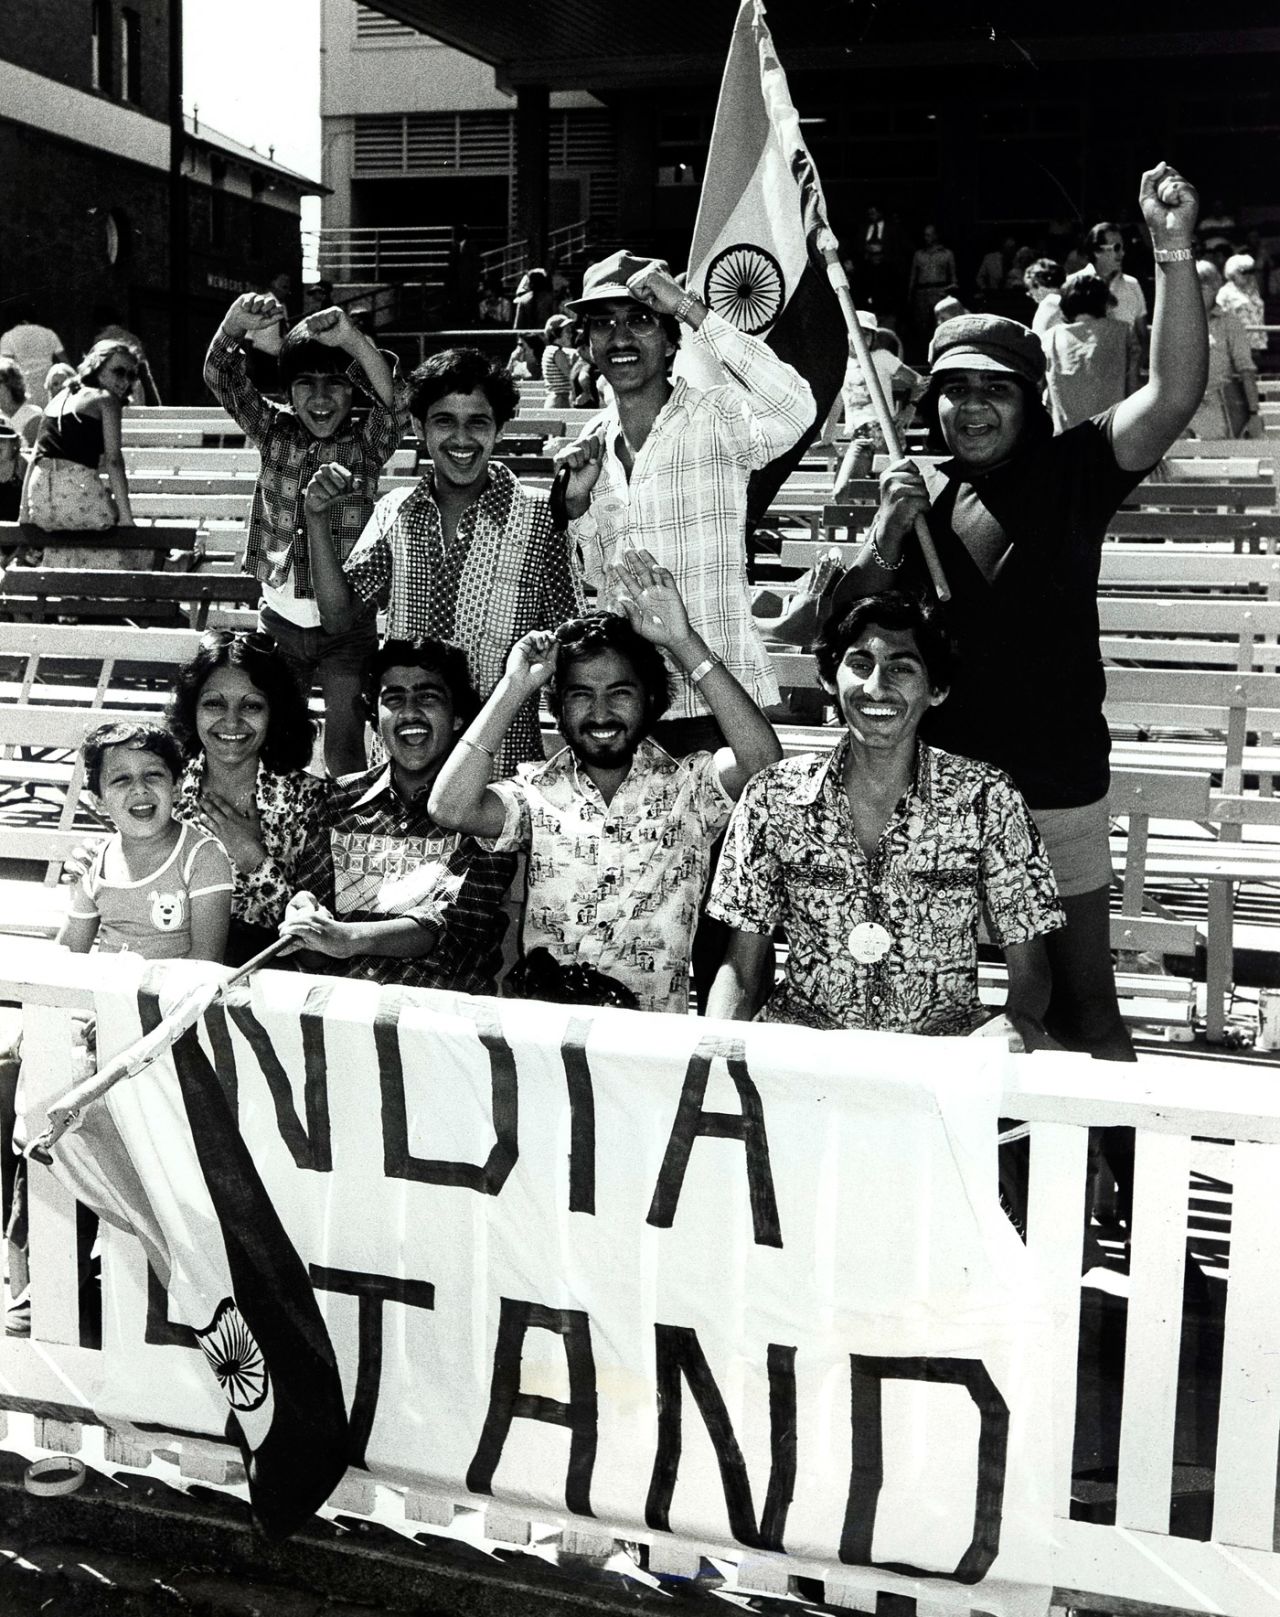 India fans enjoy the day out at the SCG, Australia v India, 4th Test, Sydney, 3rd day, January 9, 1978